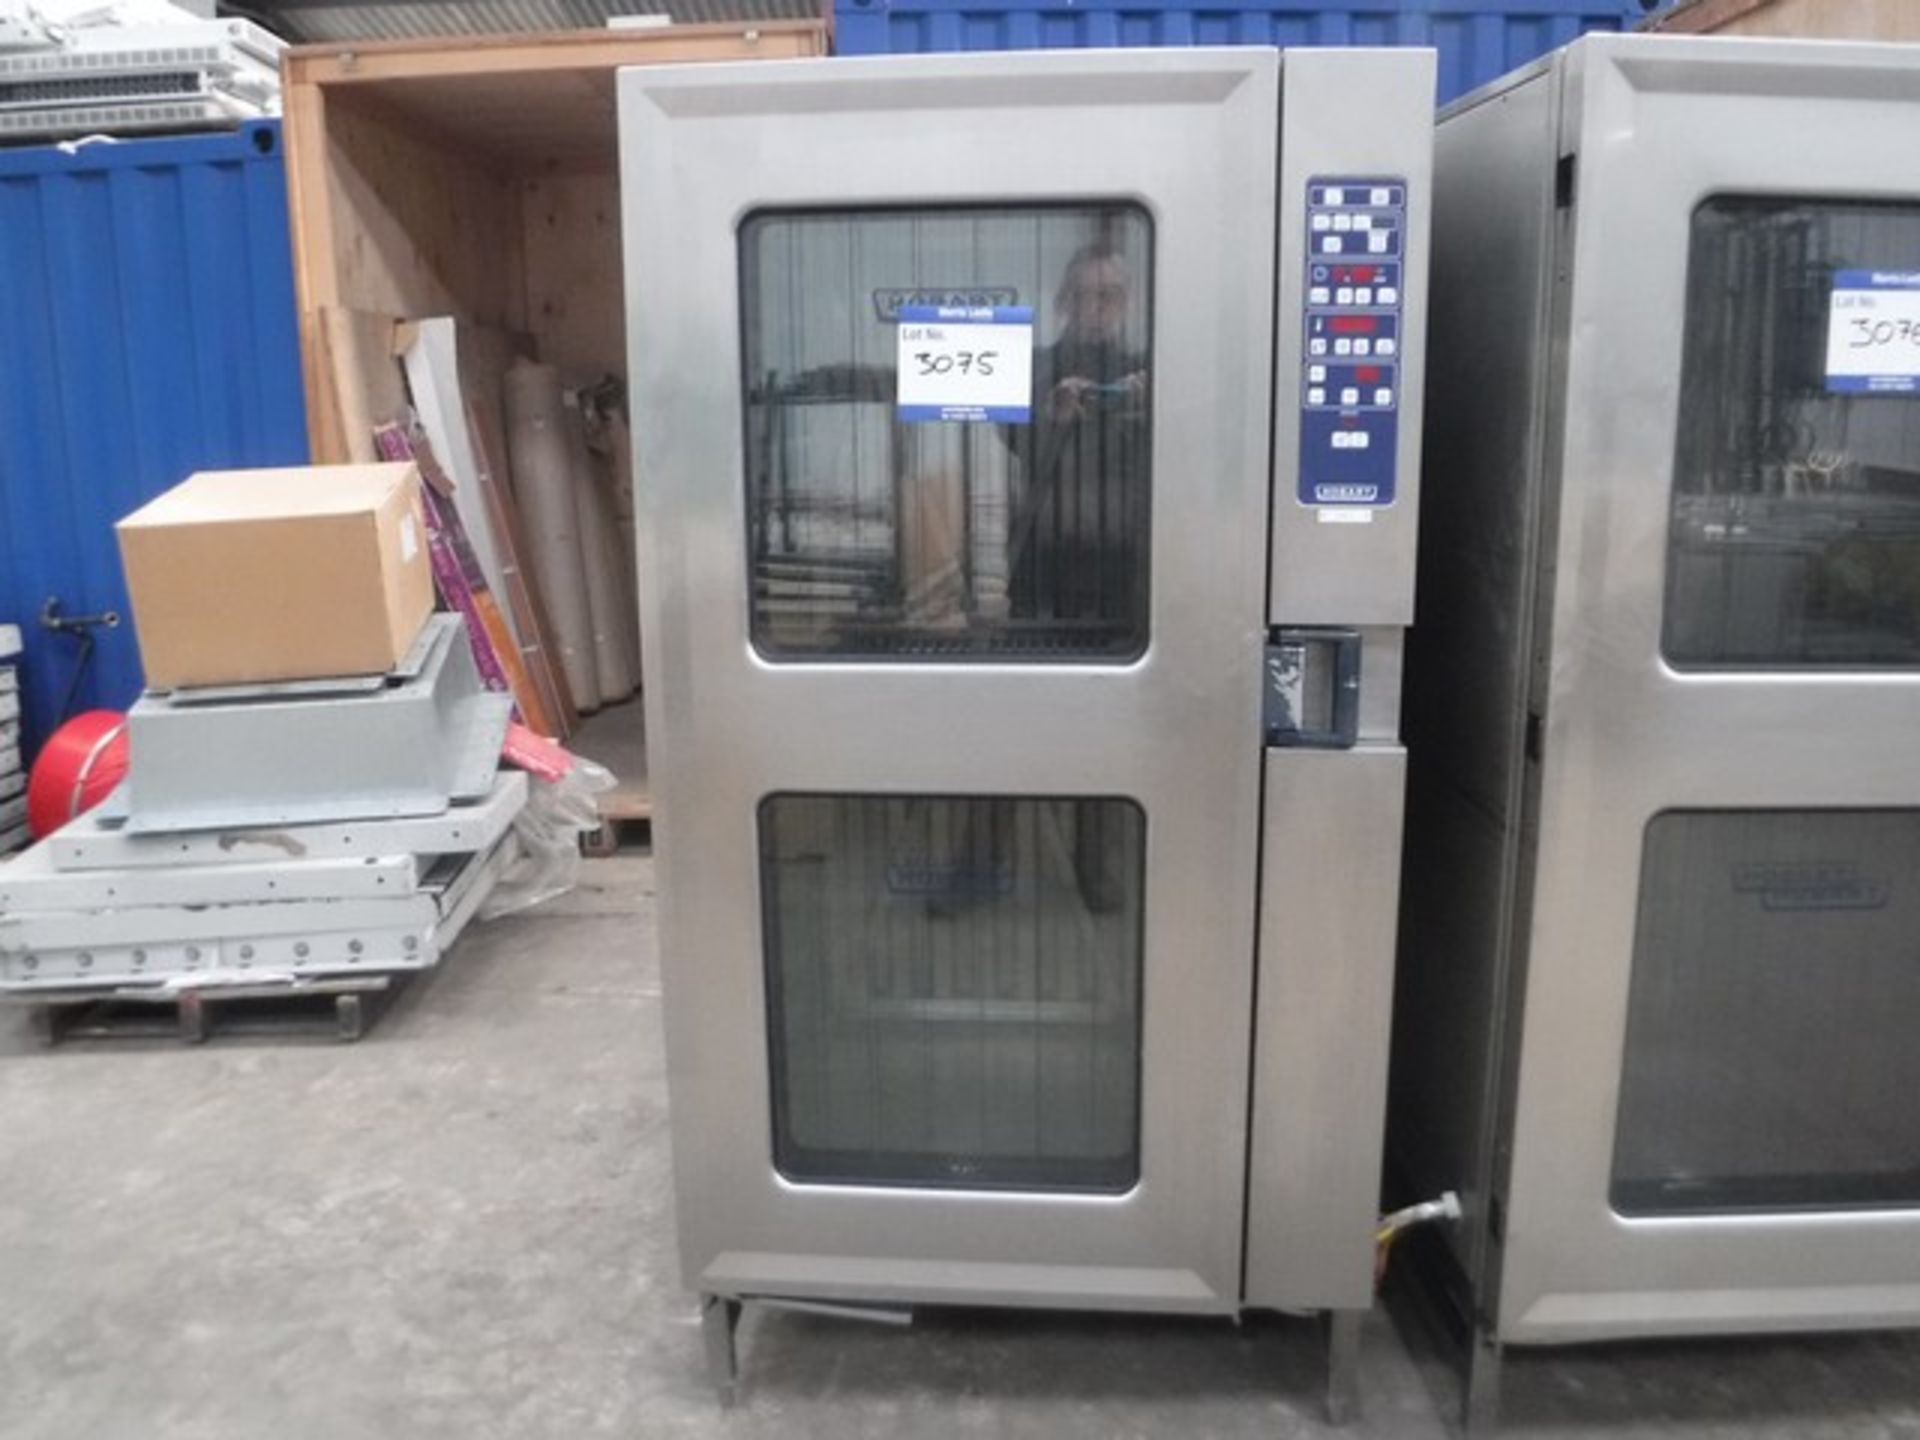 HOBART COMBI OVEN C/W TROLLY 3 PHASE